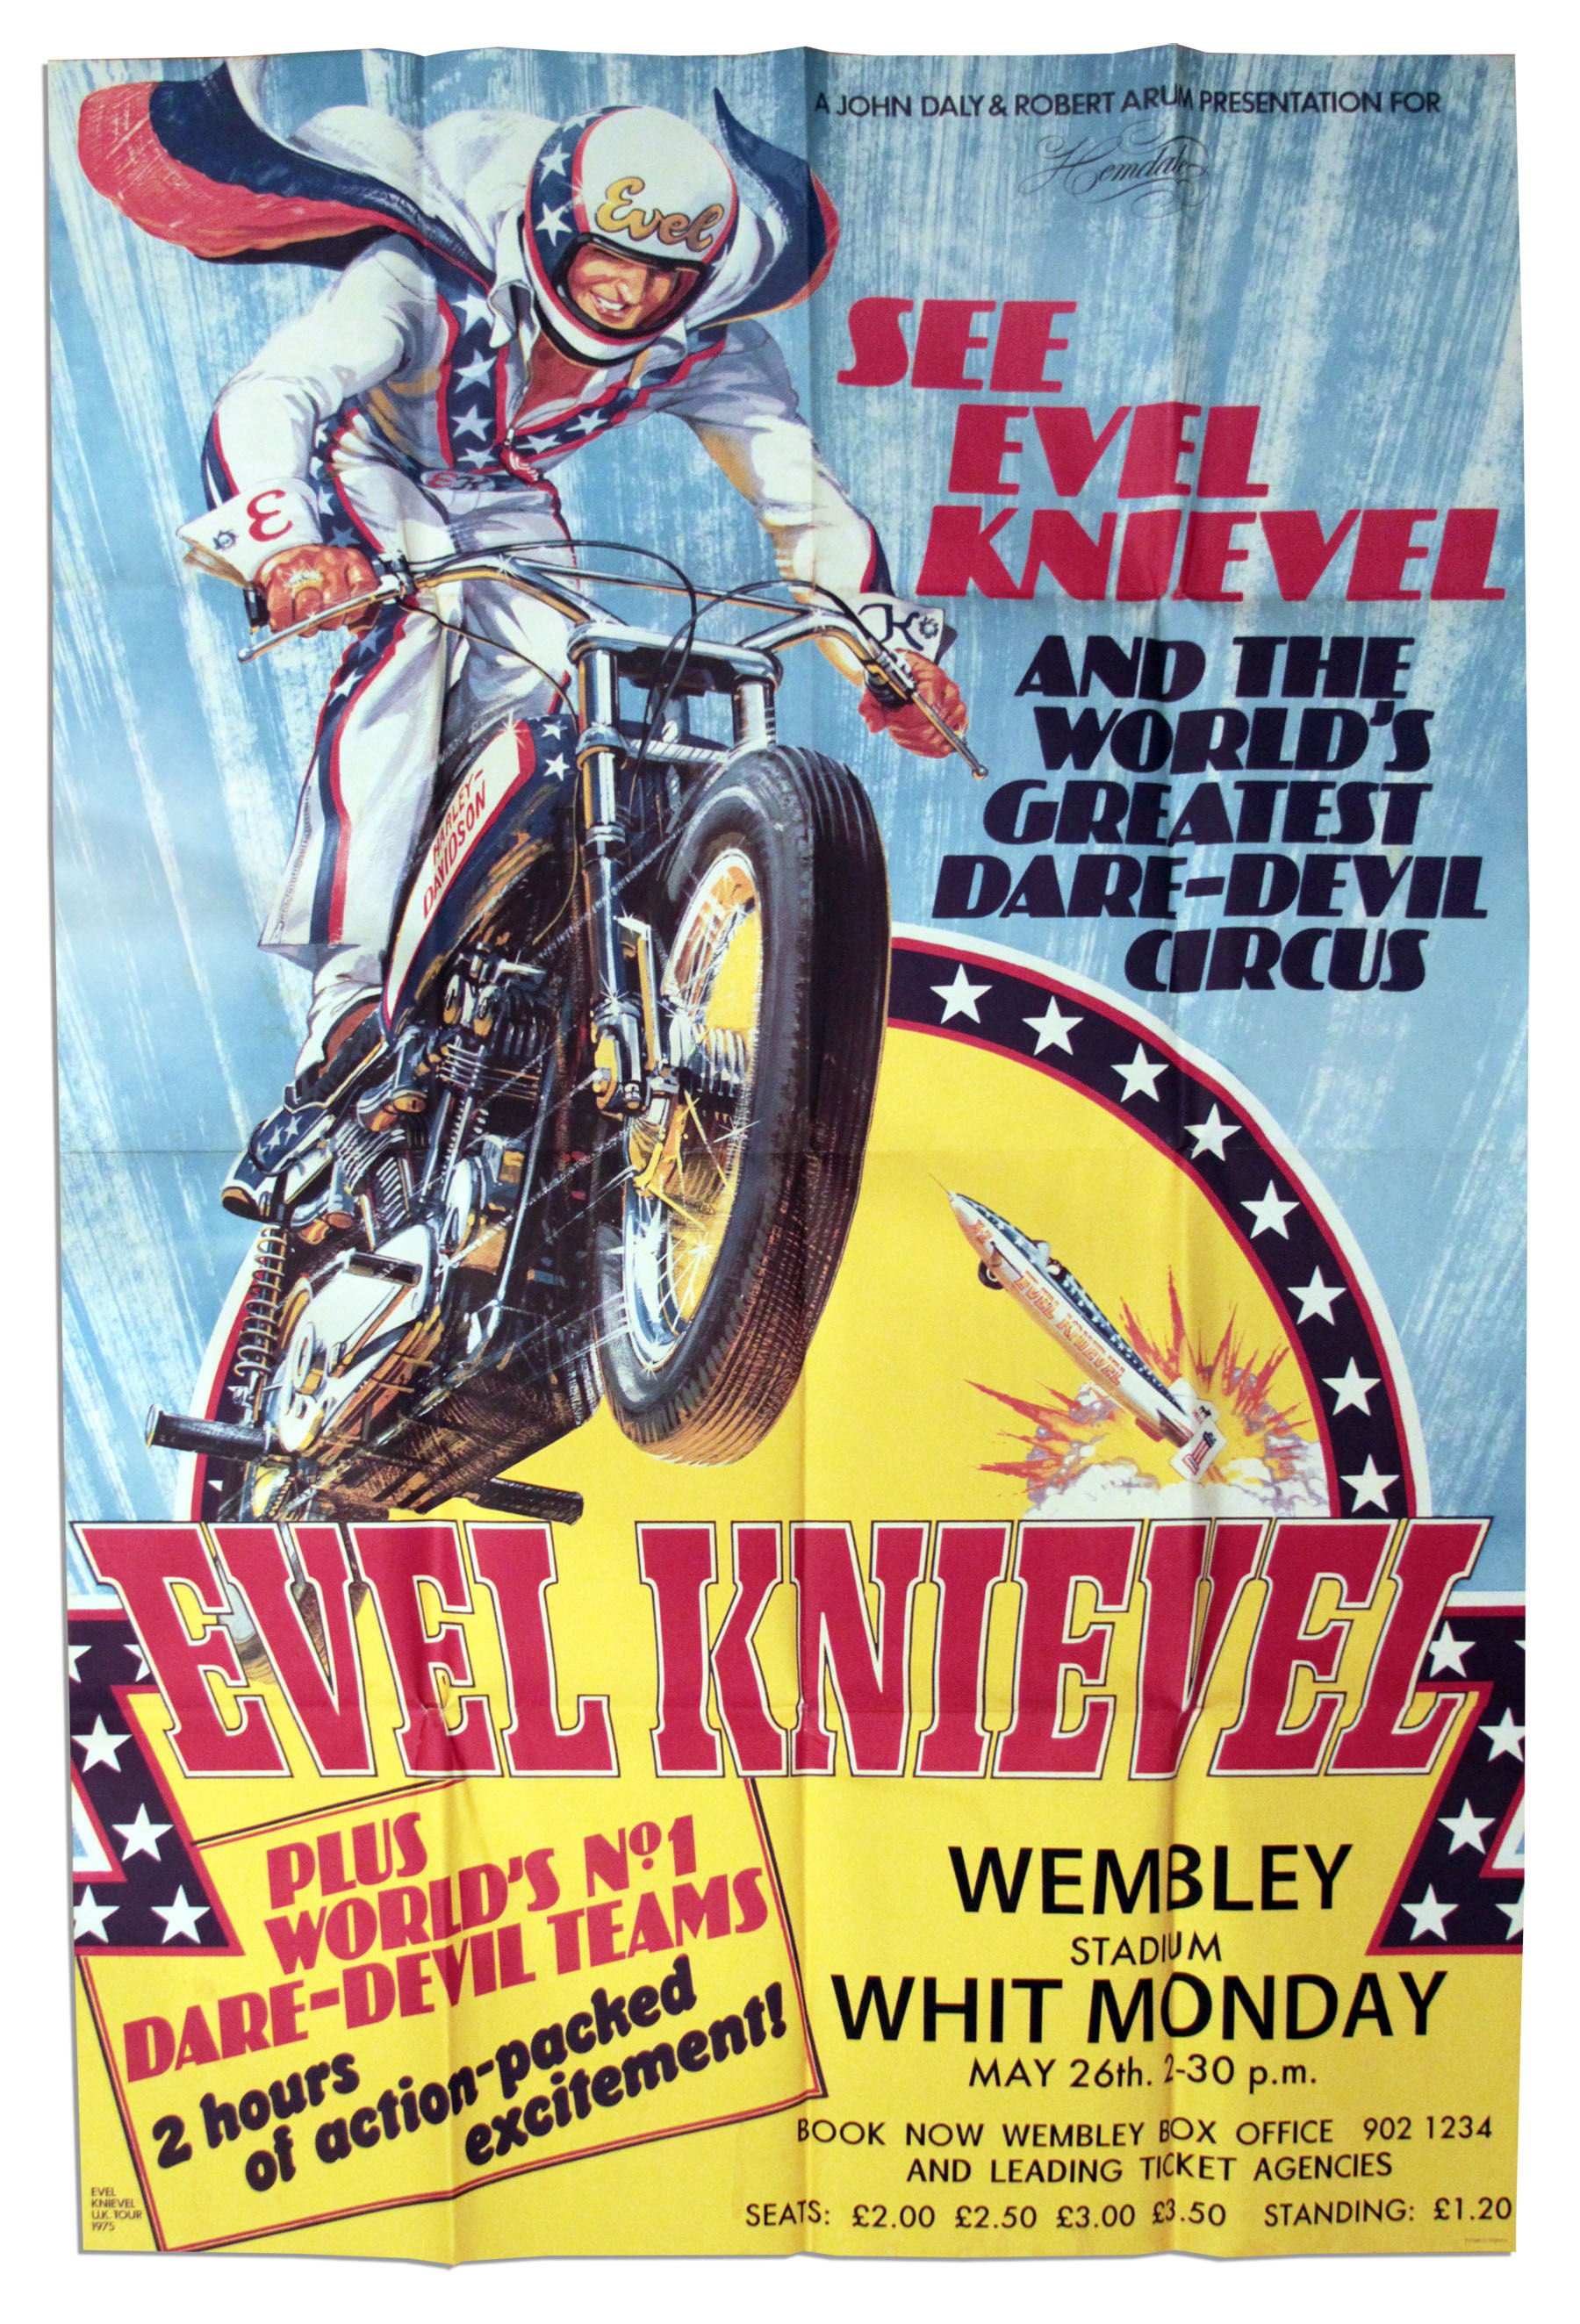 lot detail - huge poster promoting evel knievel at wembley